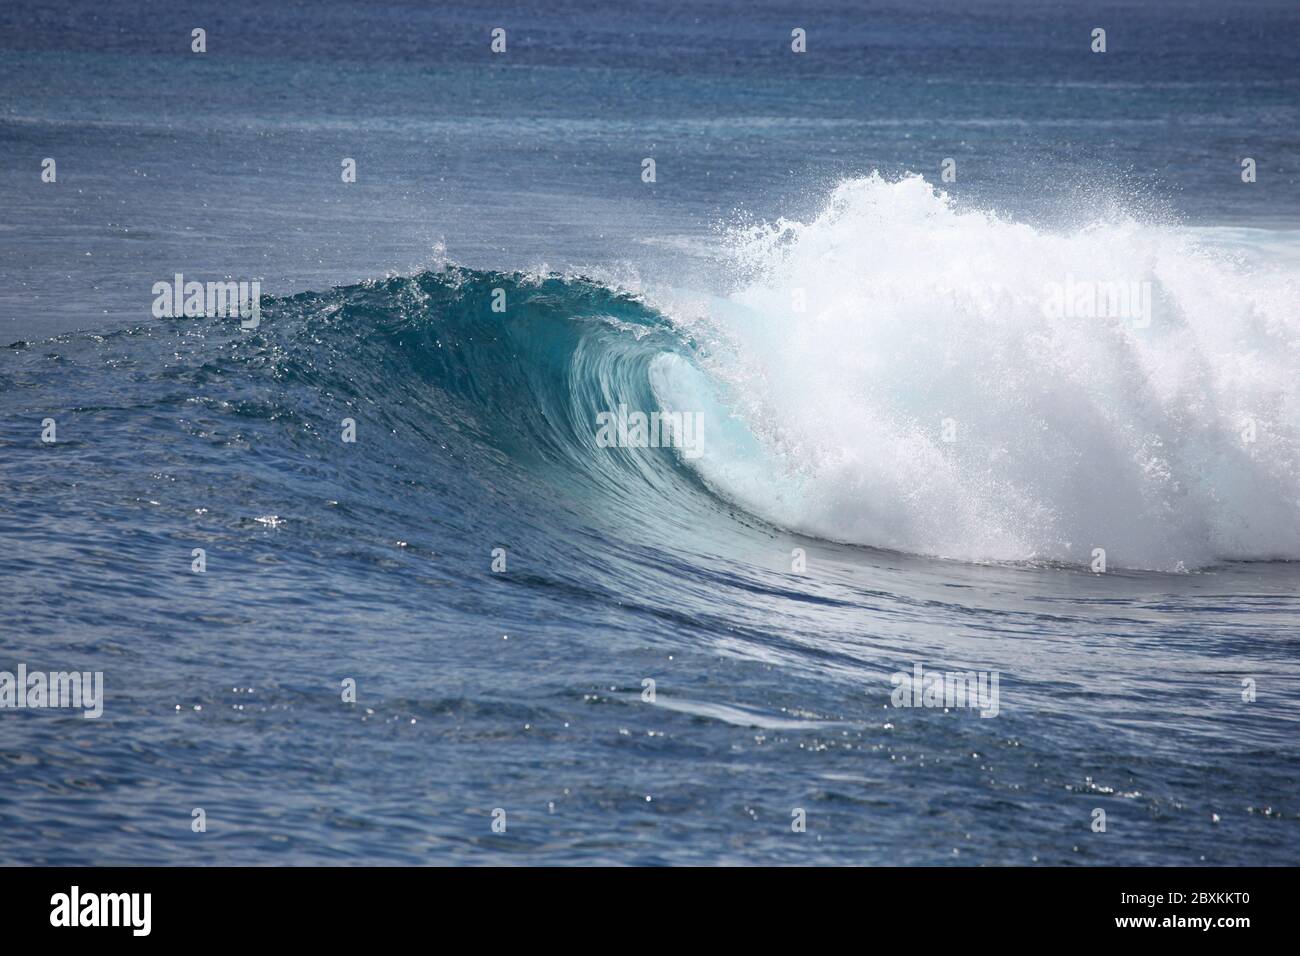 A wave breaks unridden on a shallow coral reef in the Mentawai Islands - Indonesia. These tropical islands are a popular surfing destination. Stock Photo